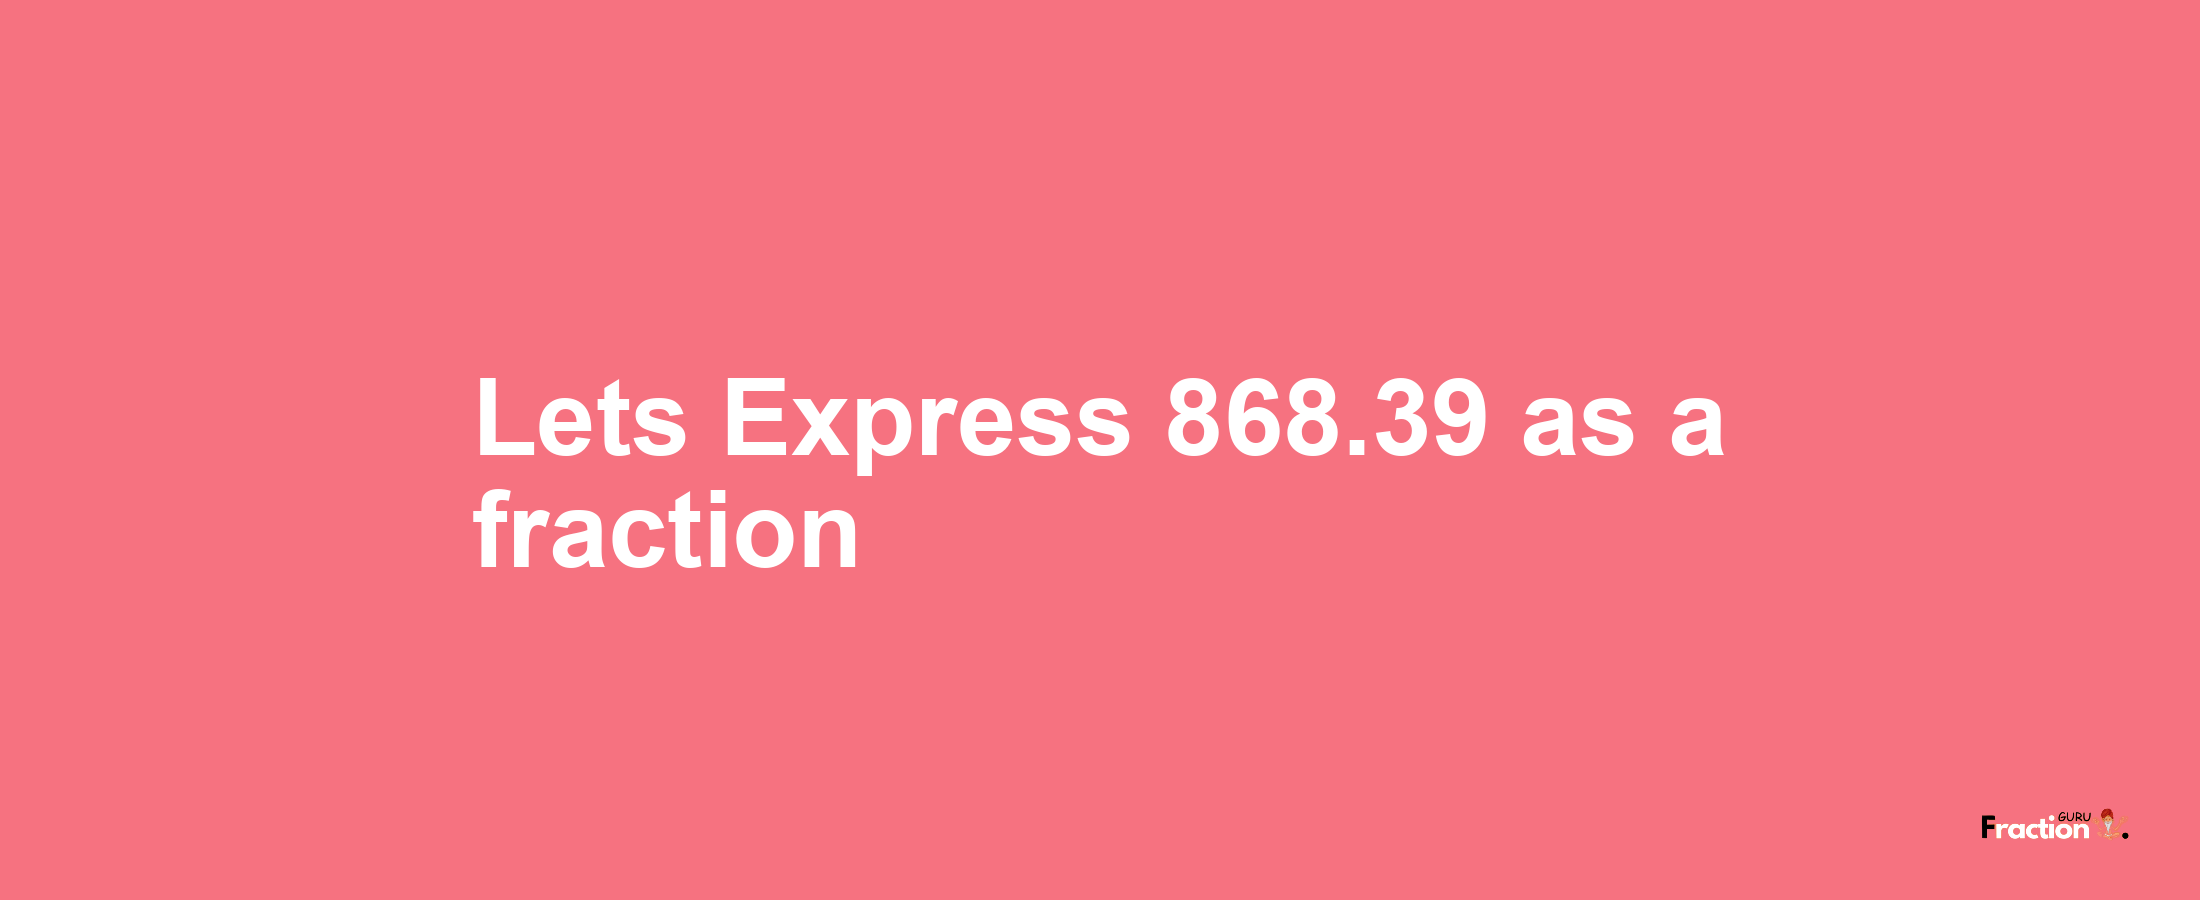 Lets Express 868.39 as afraction